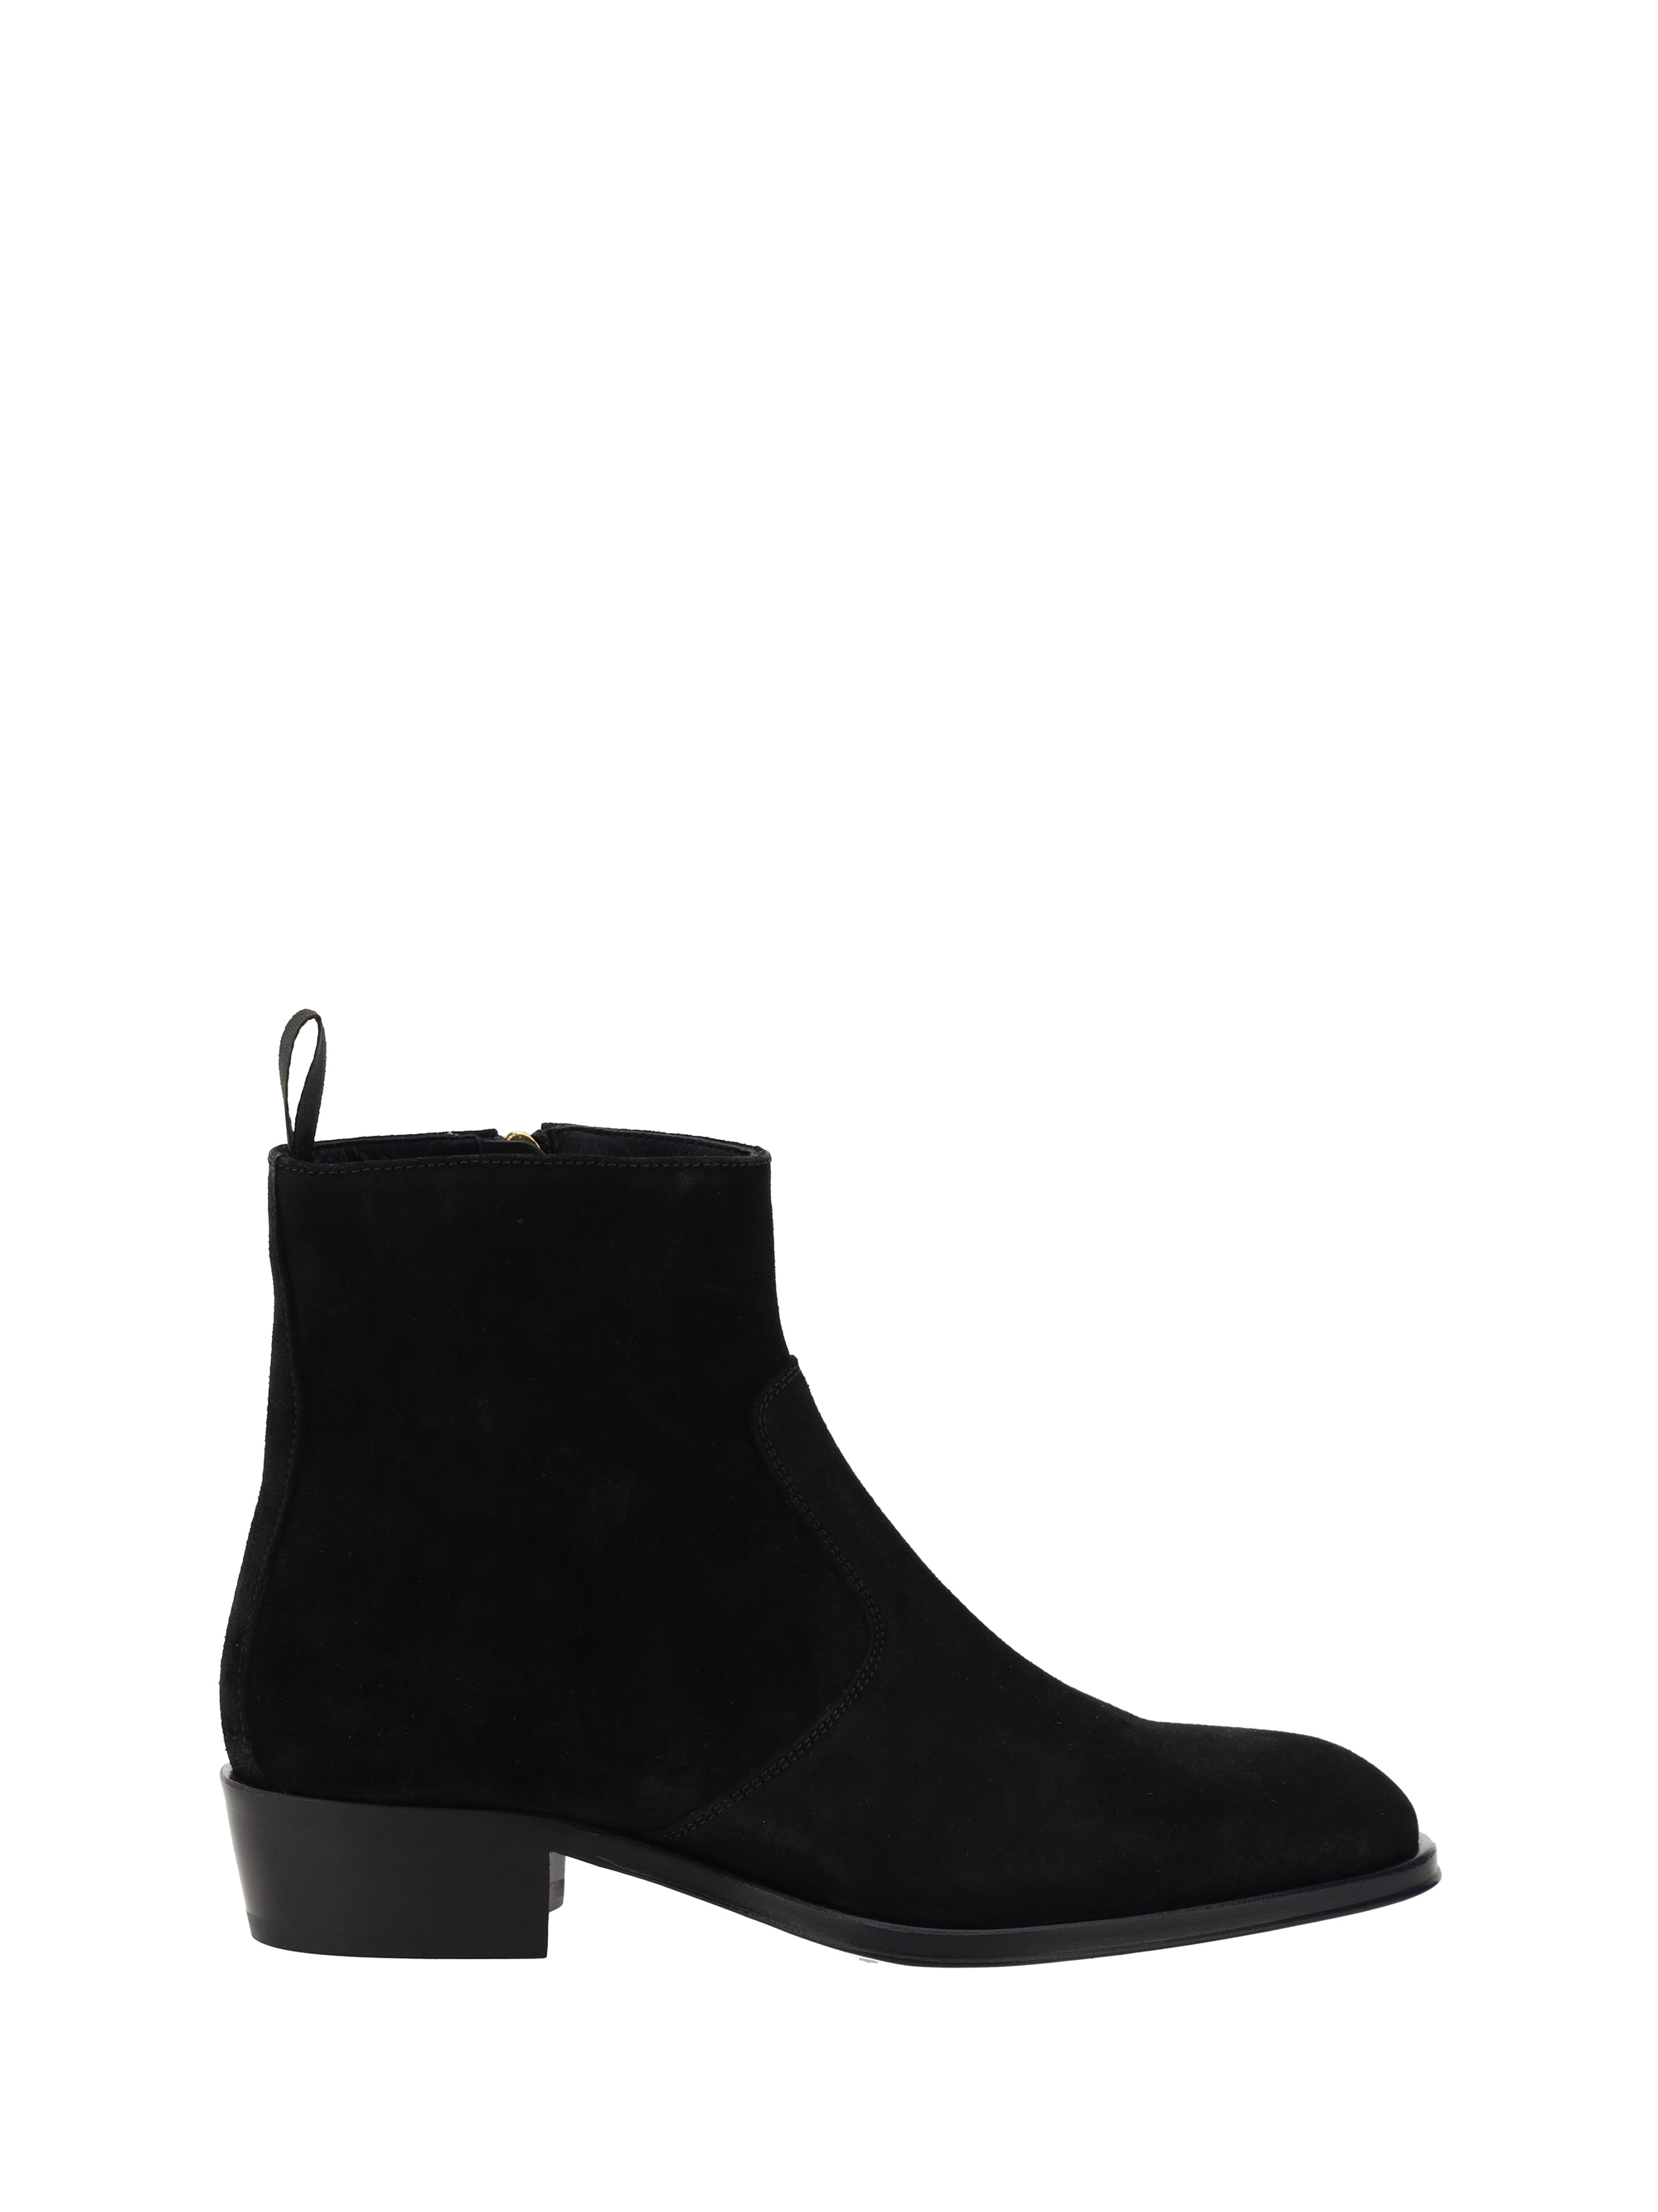 Shop Giuseppe Zanotti Ankle Boots In 2